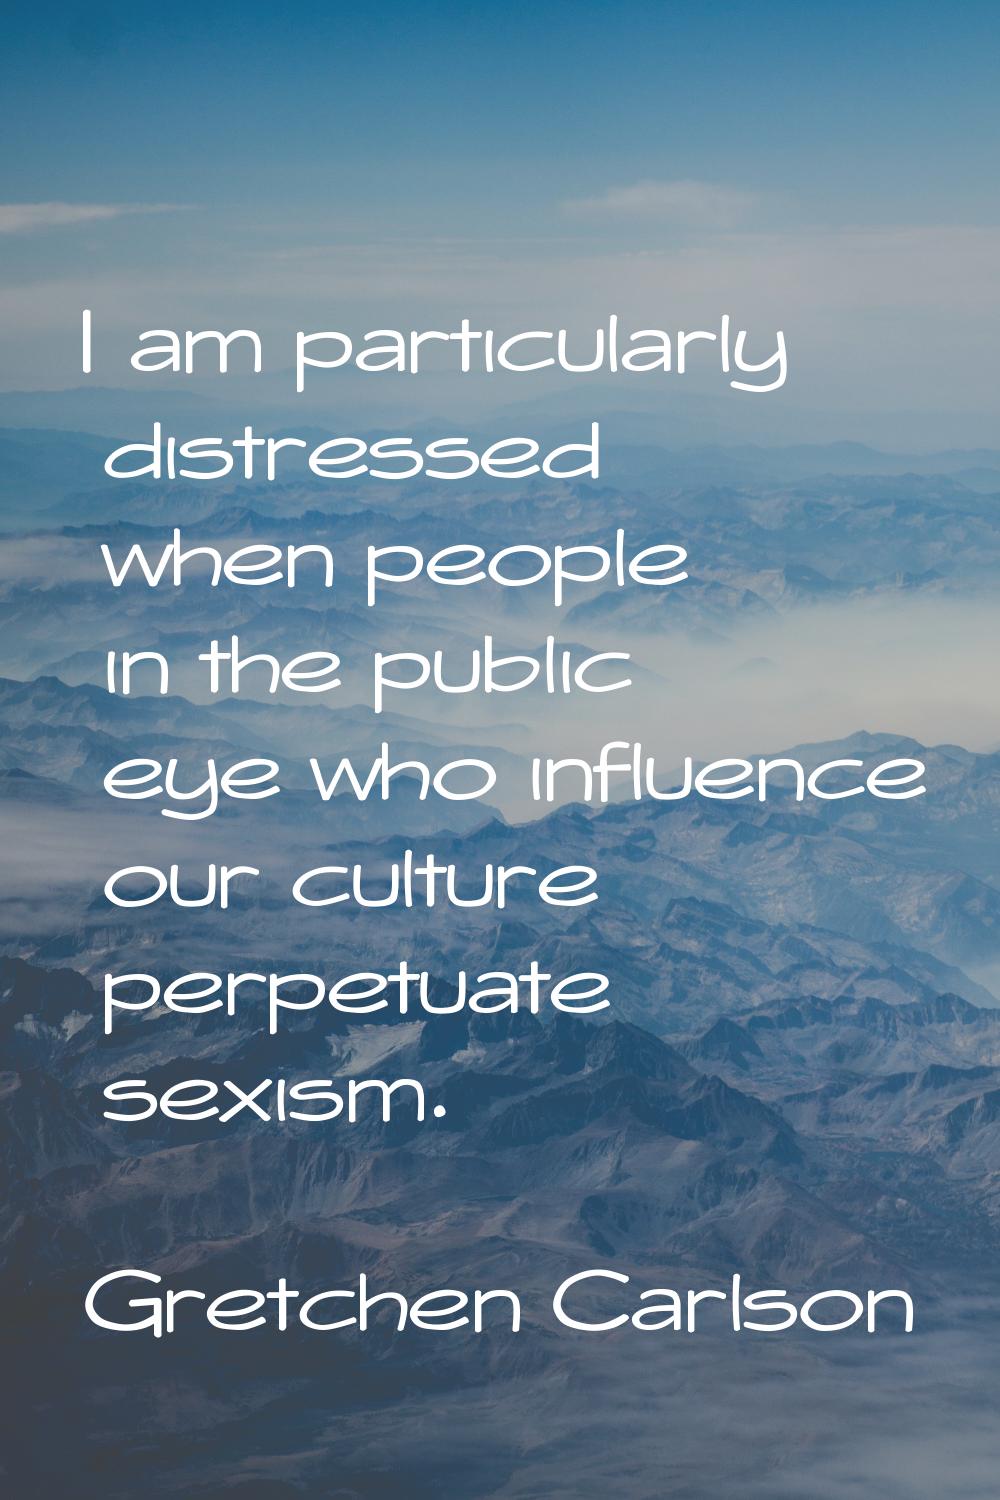 I am particularly distressed when people in the public eye who influence our culture perpetuate sex